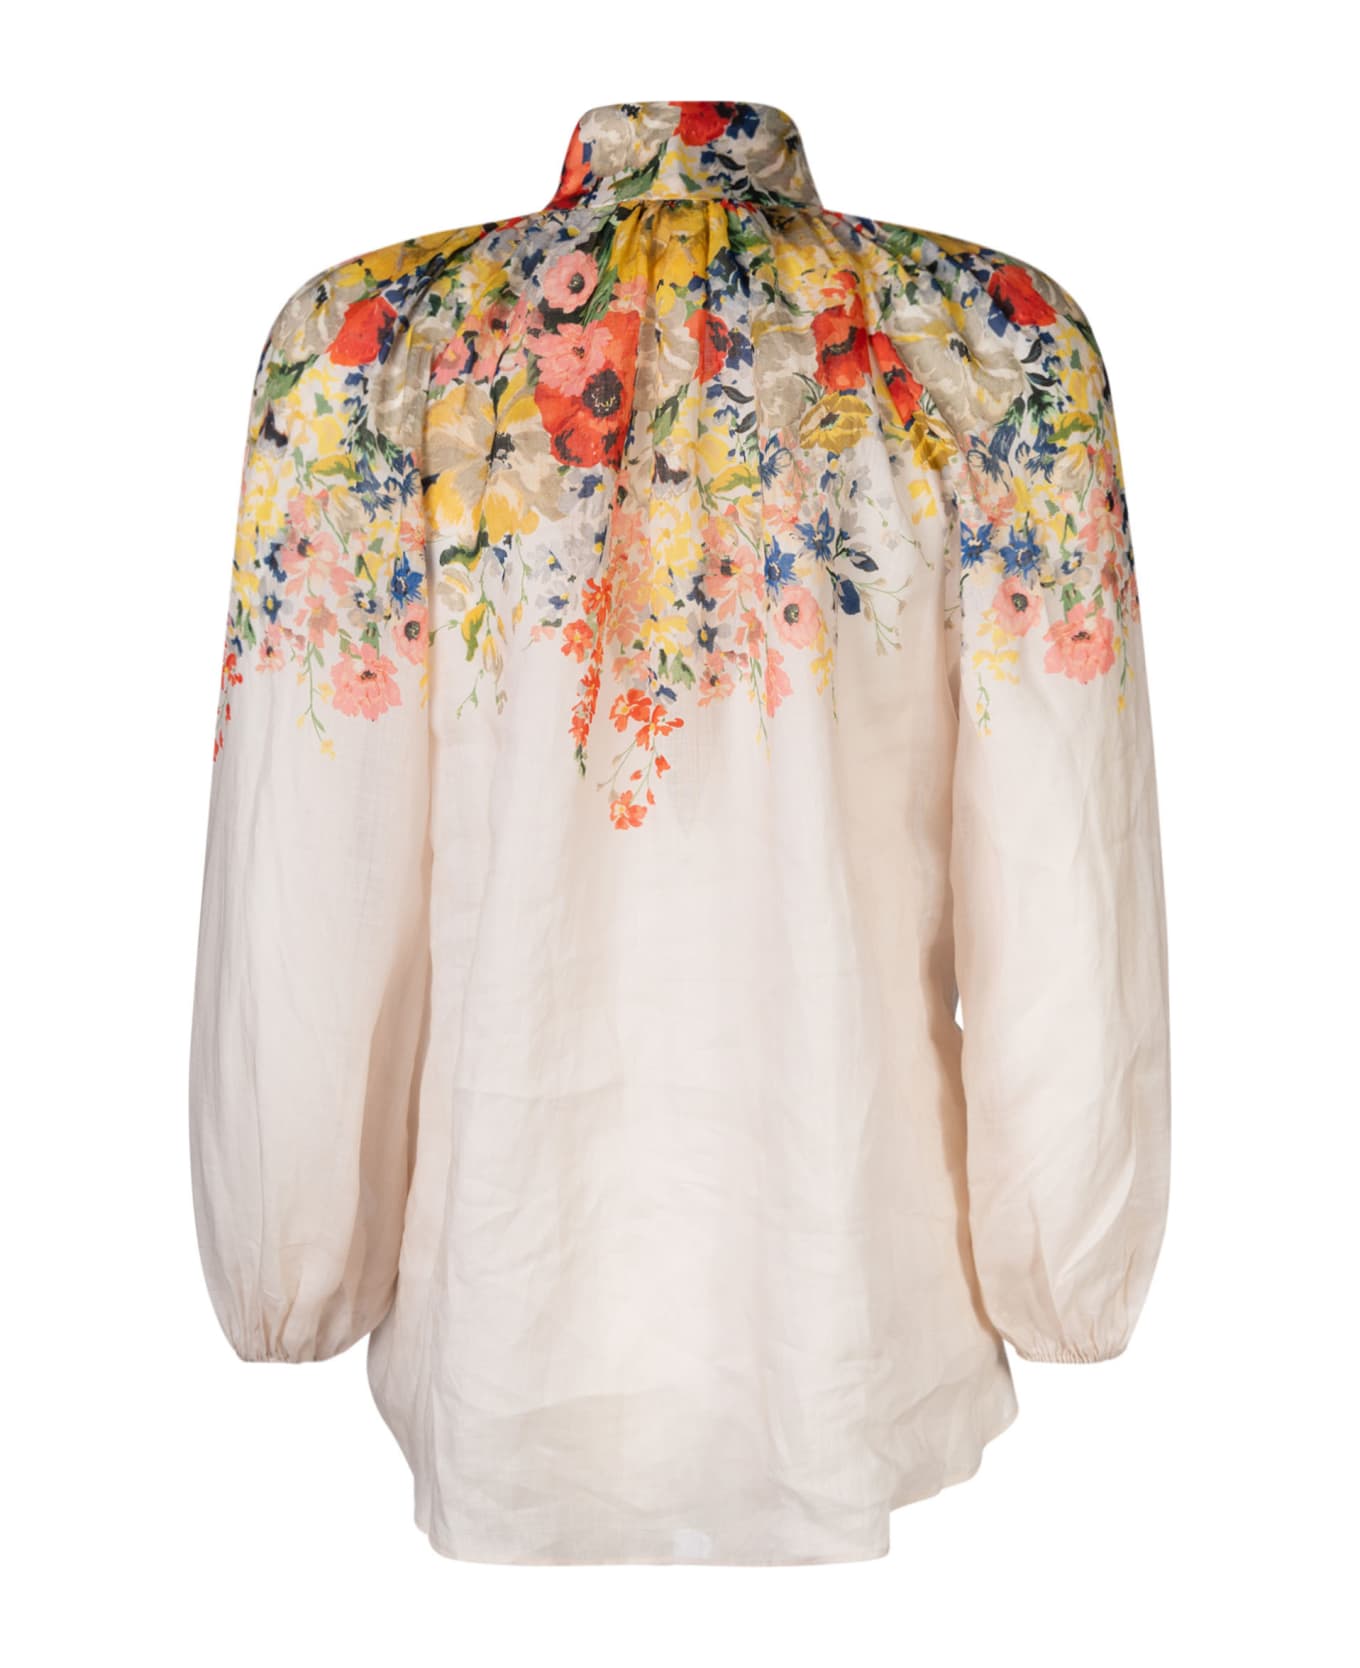 Zimmermann Floral High Neck Blouse - Ivory ブラウス